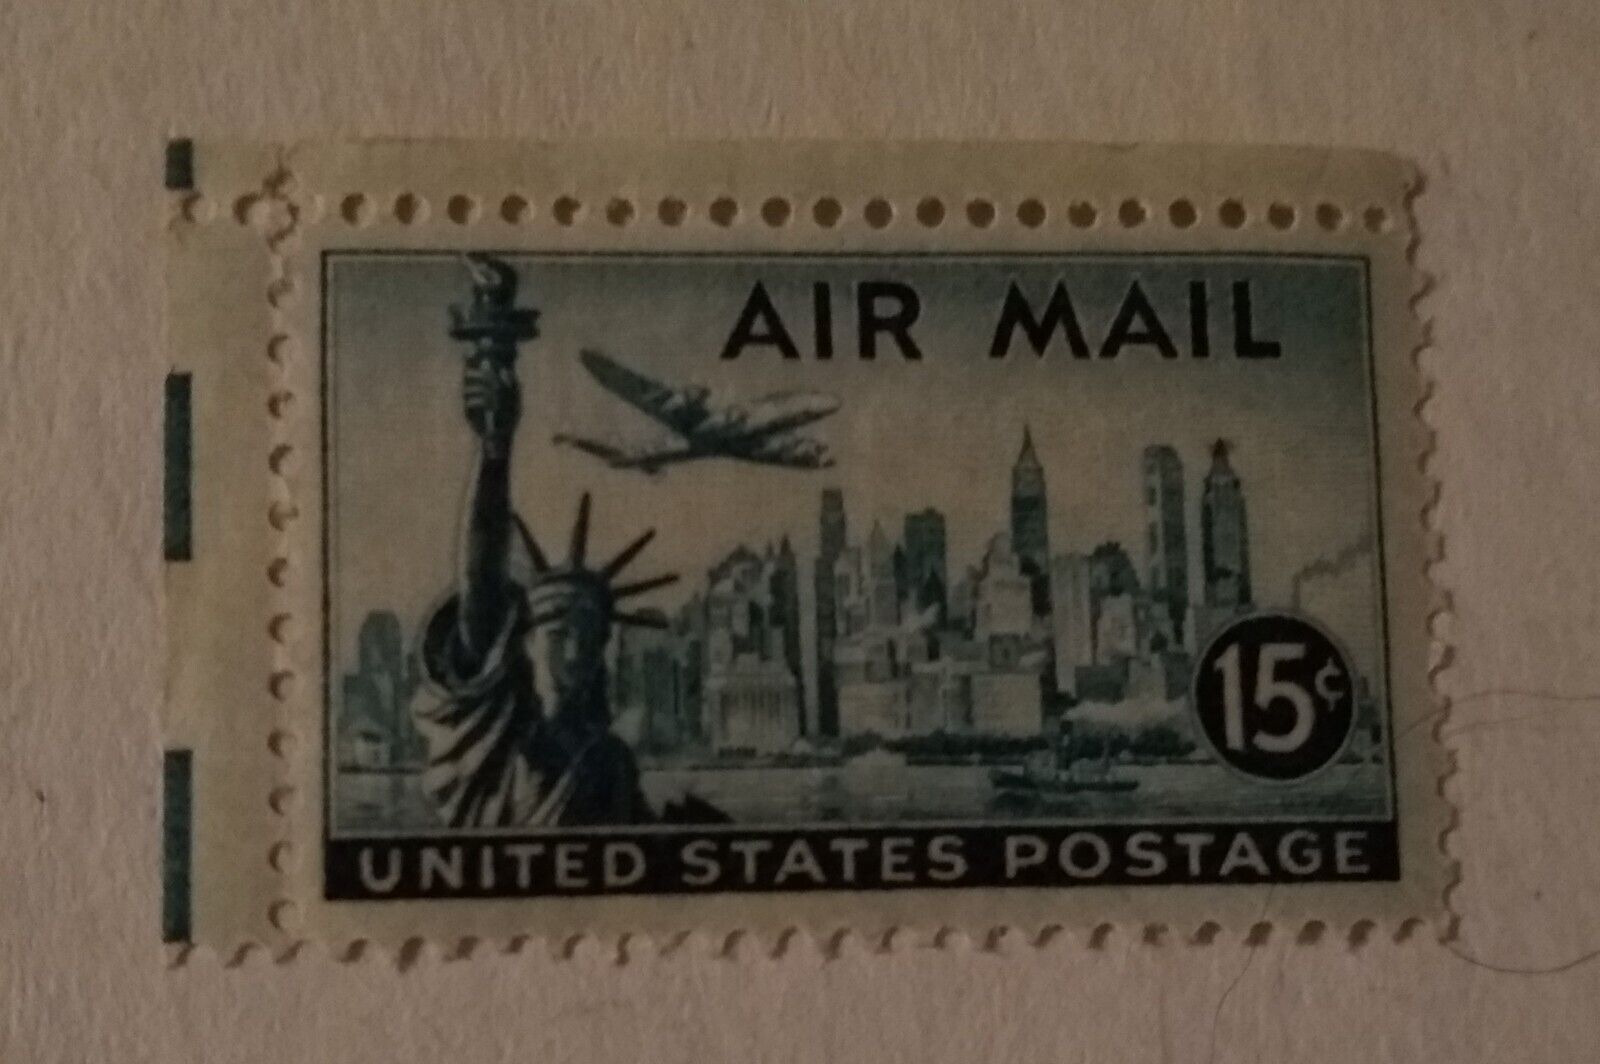 Get your hands on this vintage United States Air Mail Stamp in green